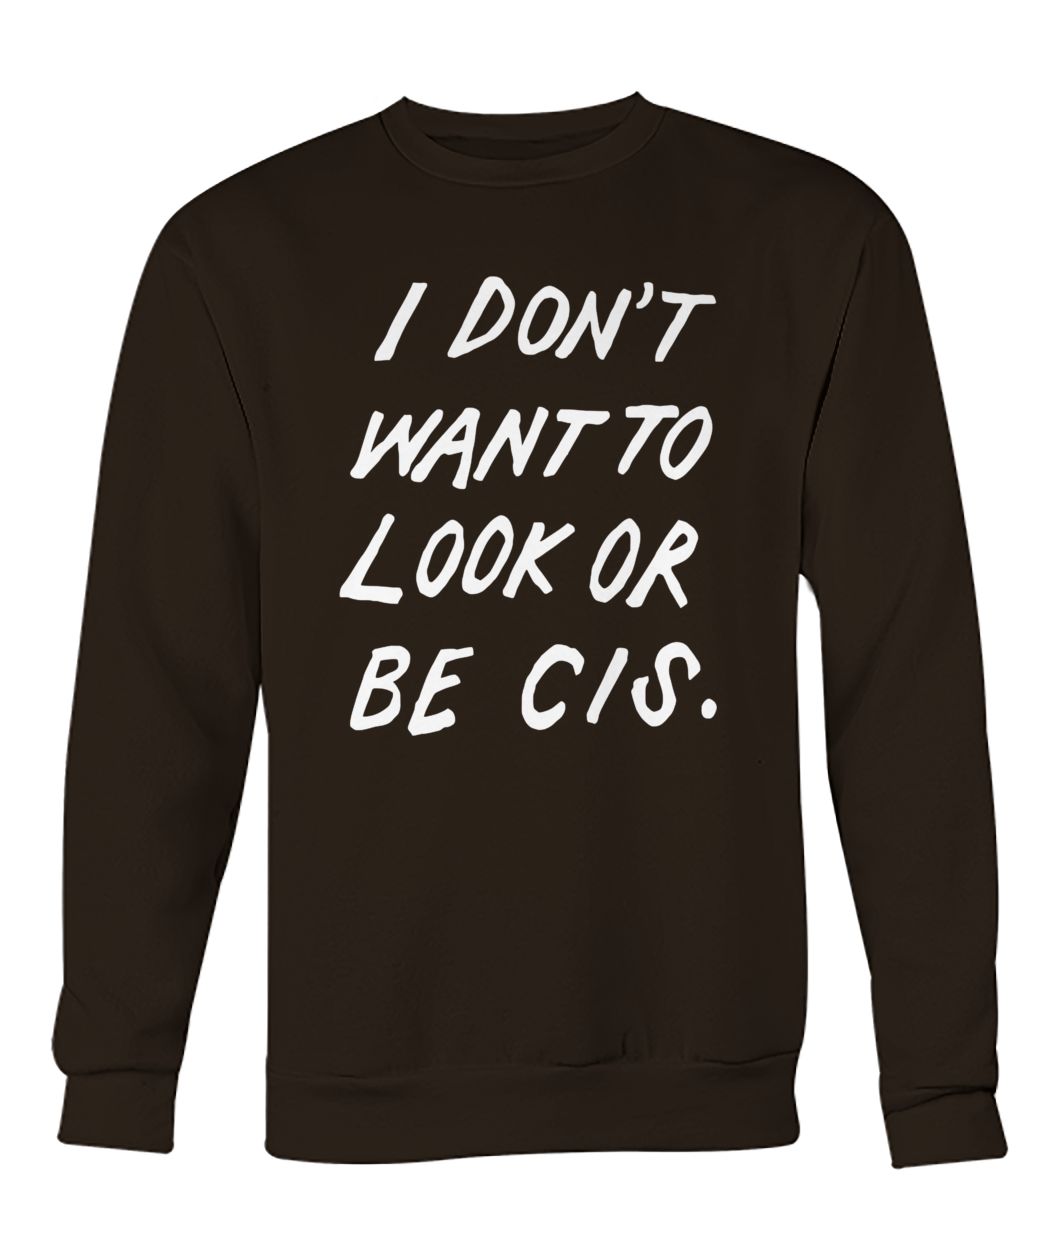 I don't want to look or be cis crew neck sweatshirt